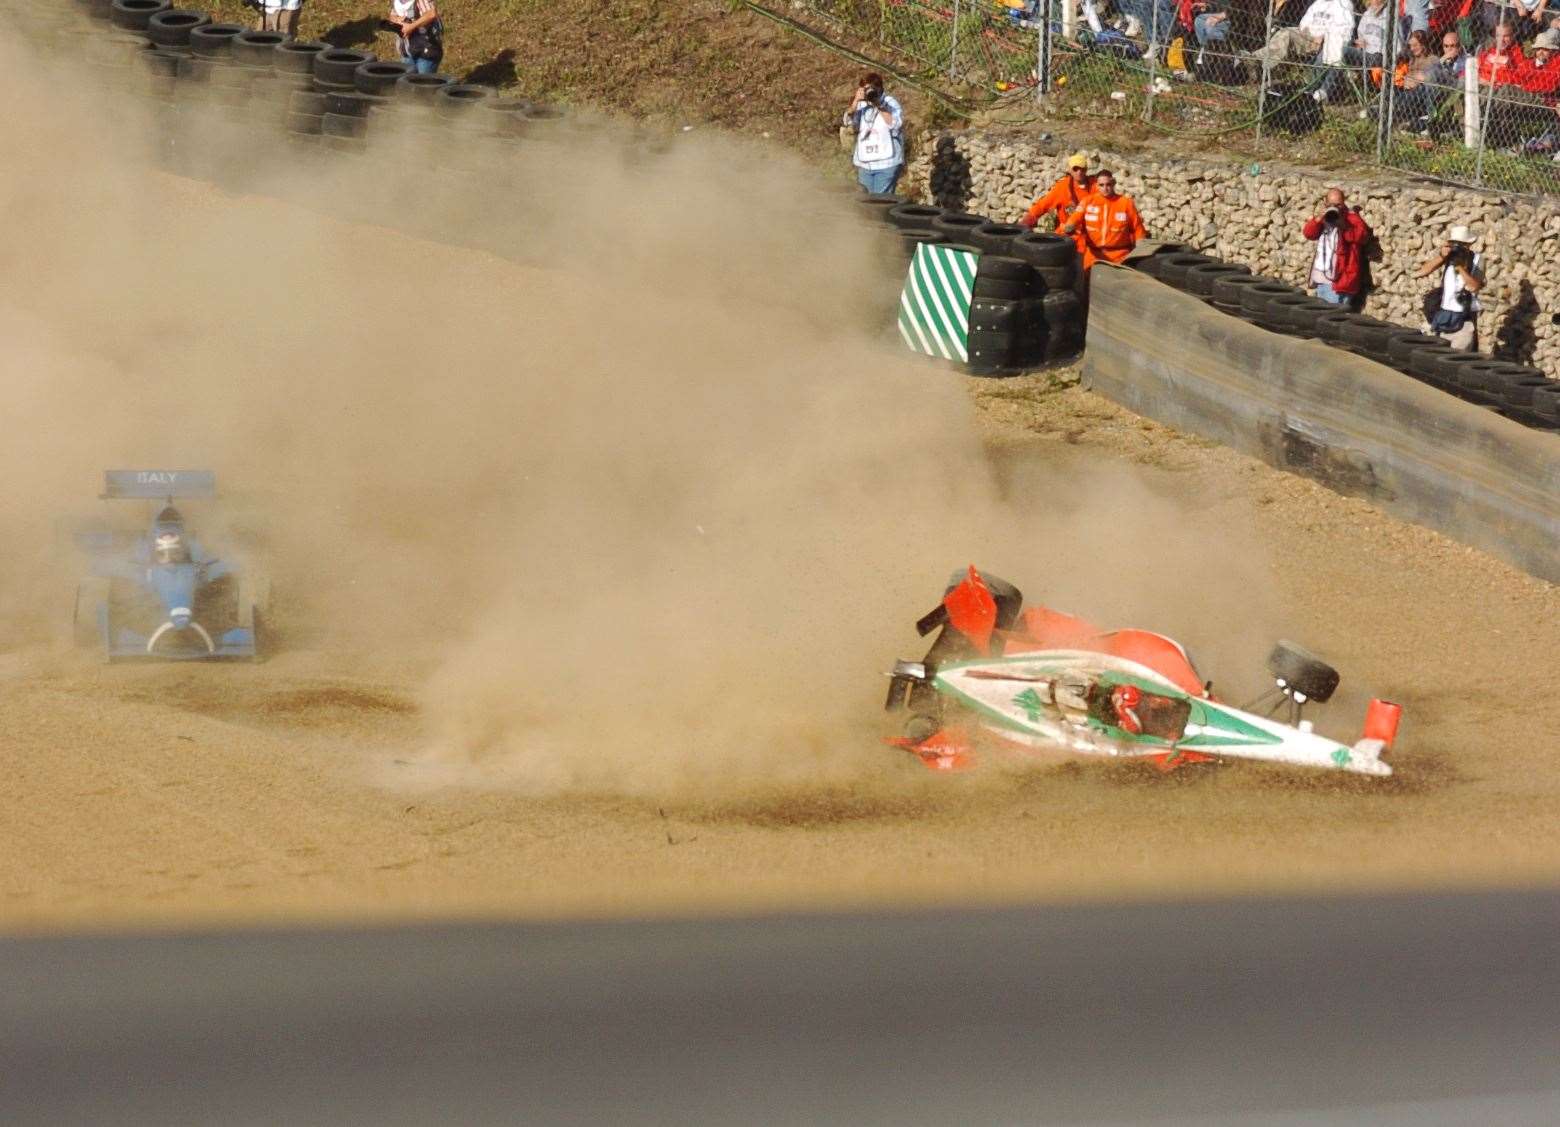 The inaugural event in 2005 became famous for Team Lebanon's spectacular barrel-roll at Paddock Hill Bend during the feature race. Picture: Barry Goodwin